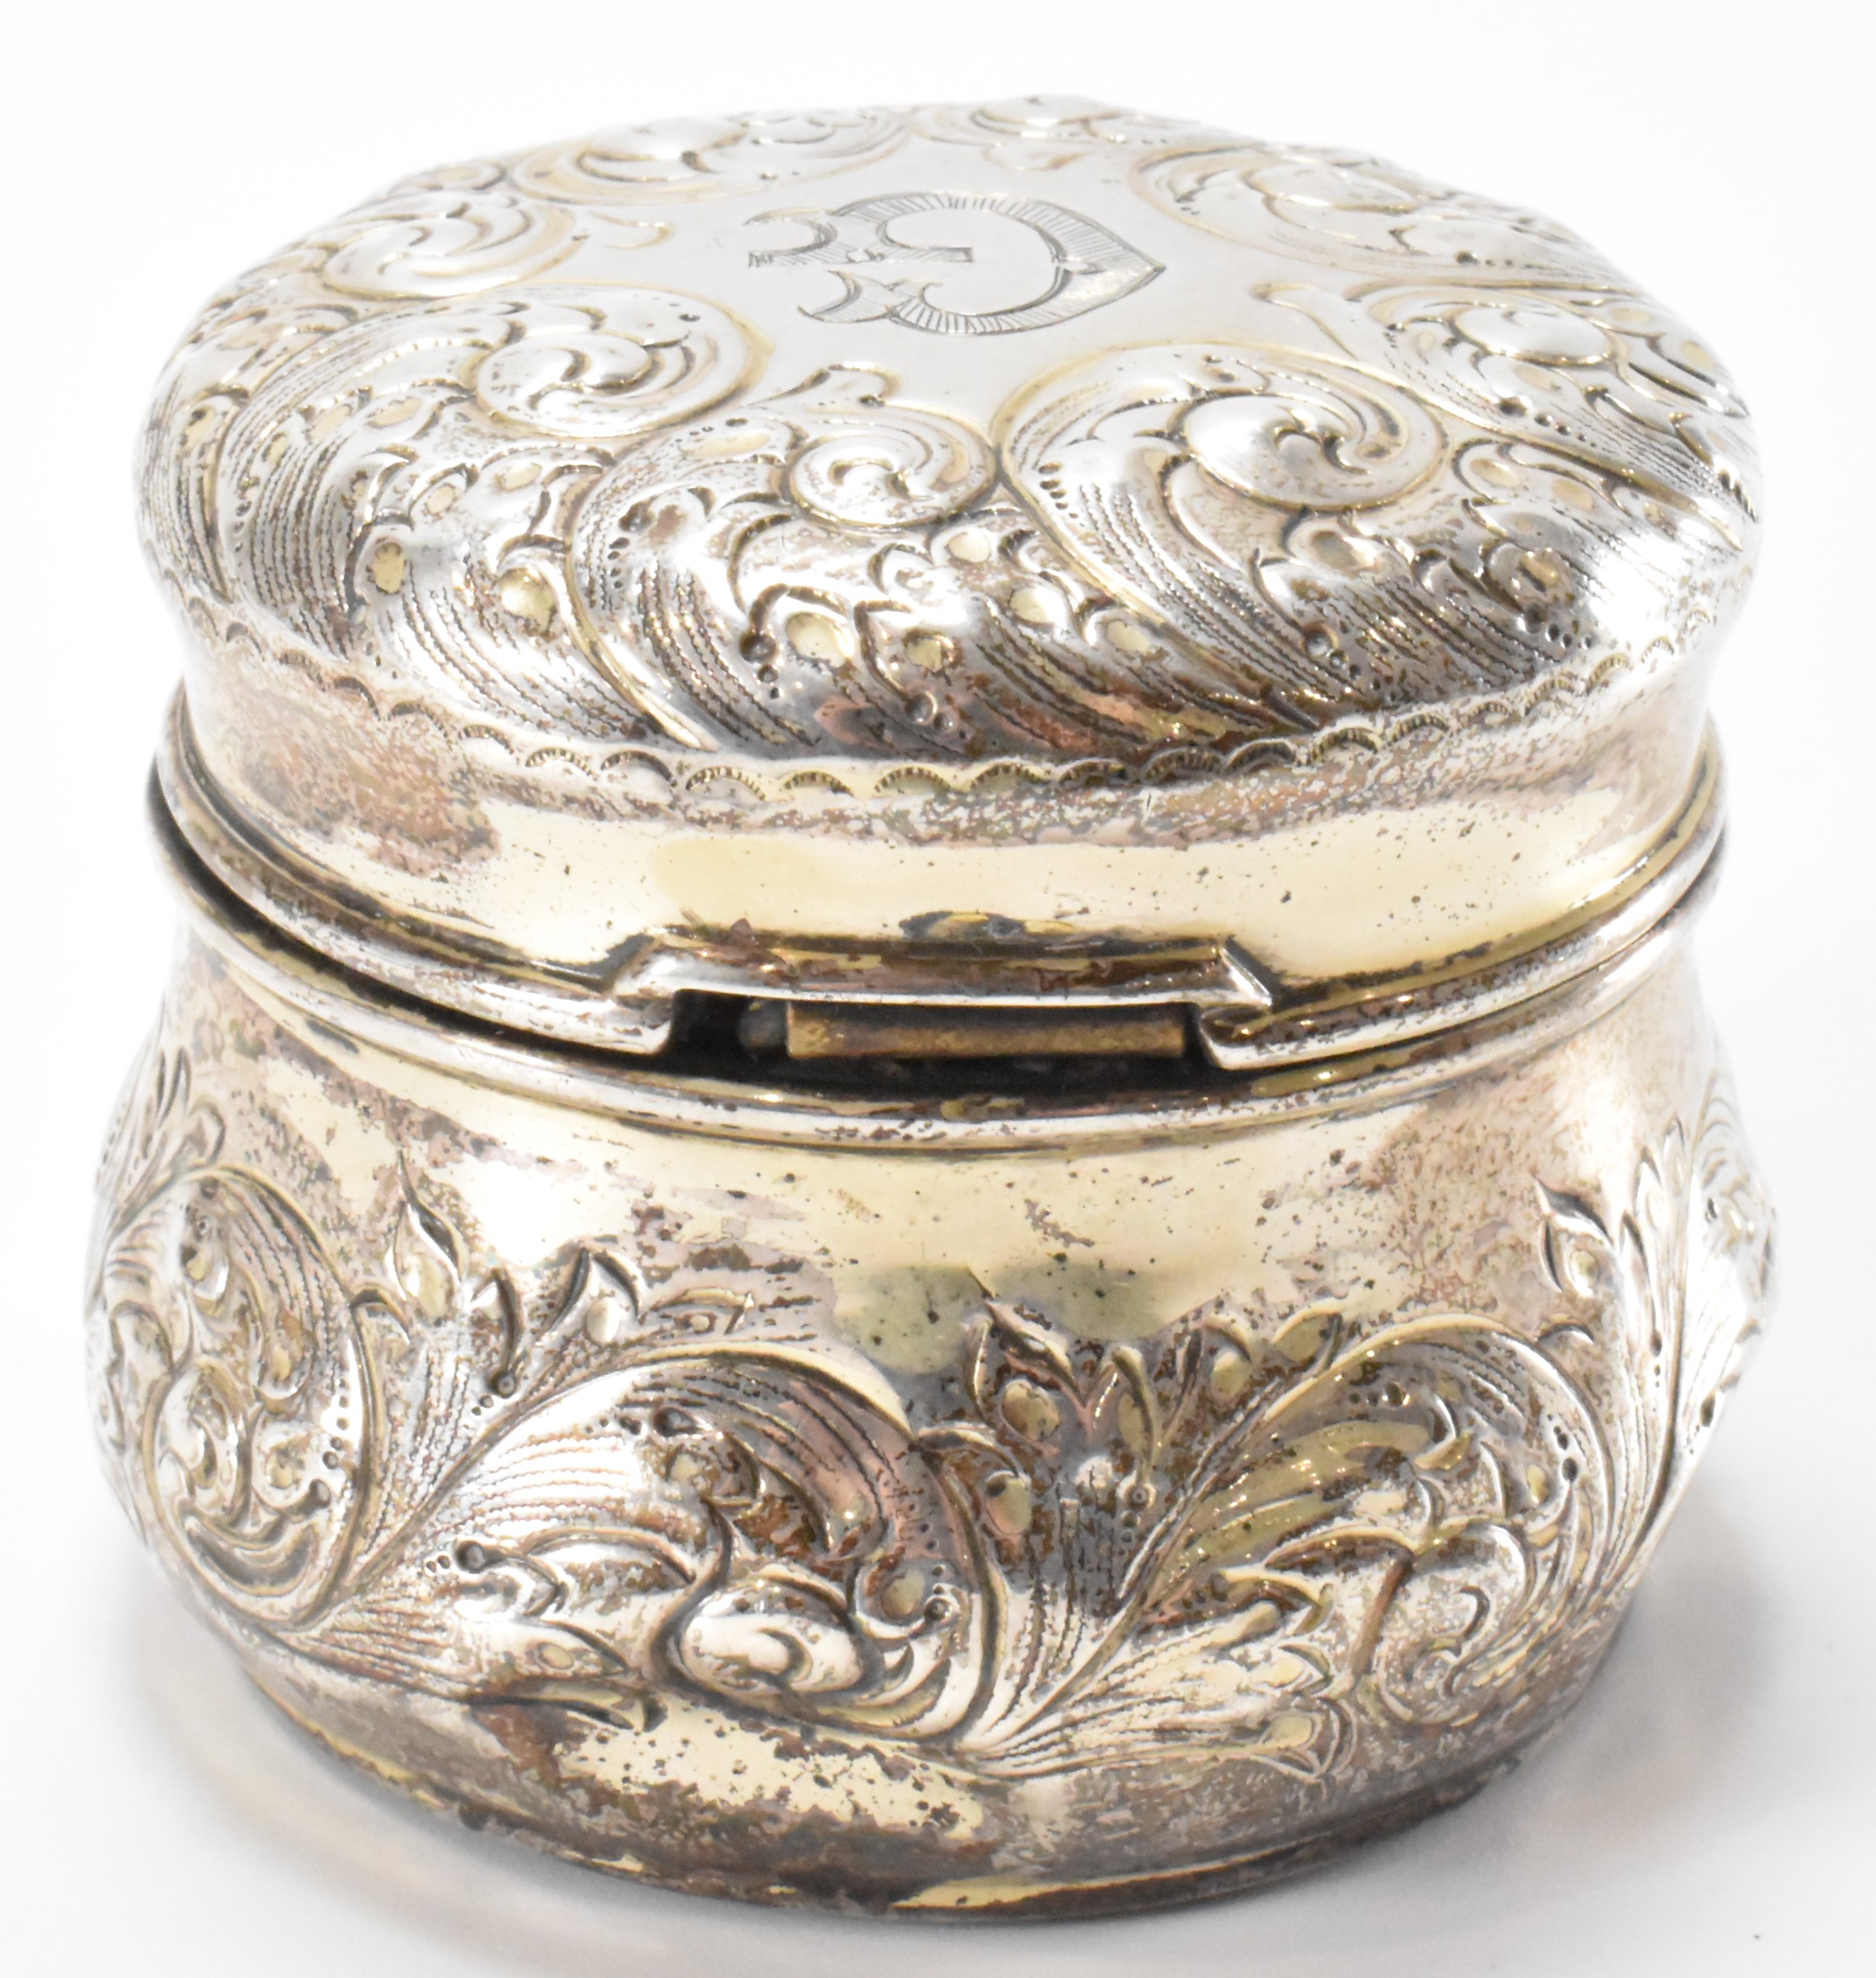 EDWARDIAN SILVER CASED INKWELL - Image 4 of 6